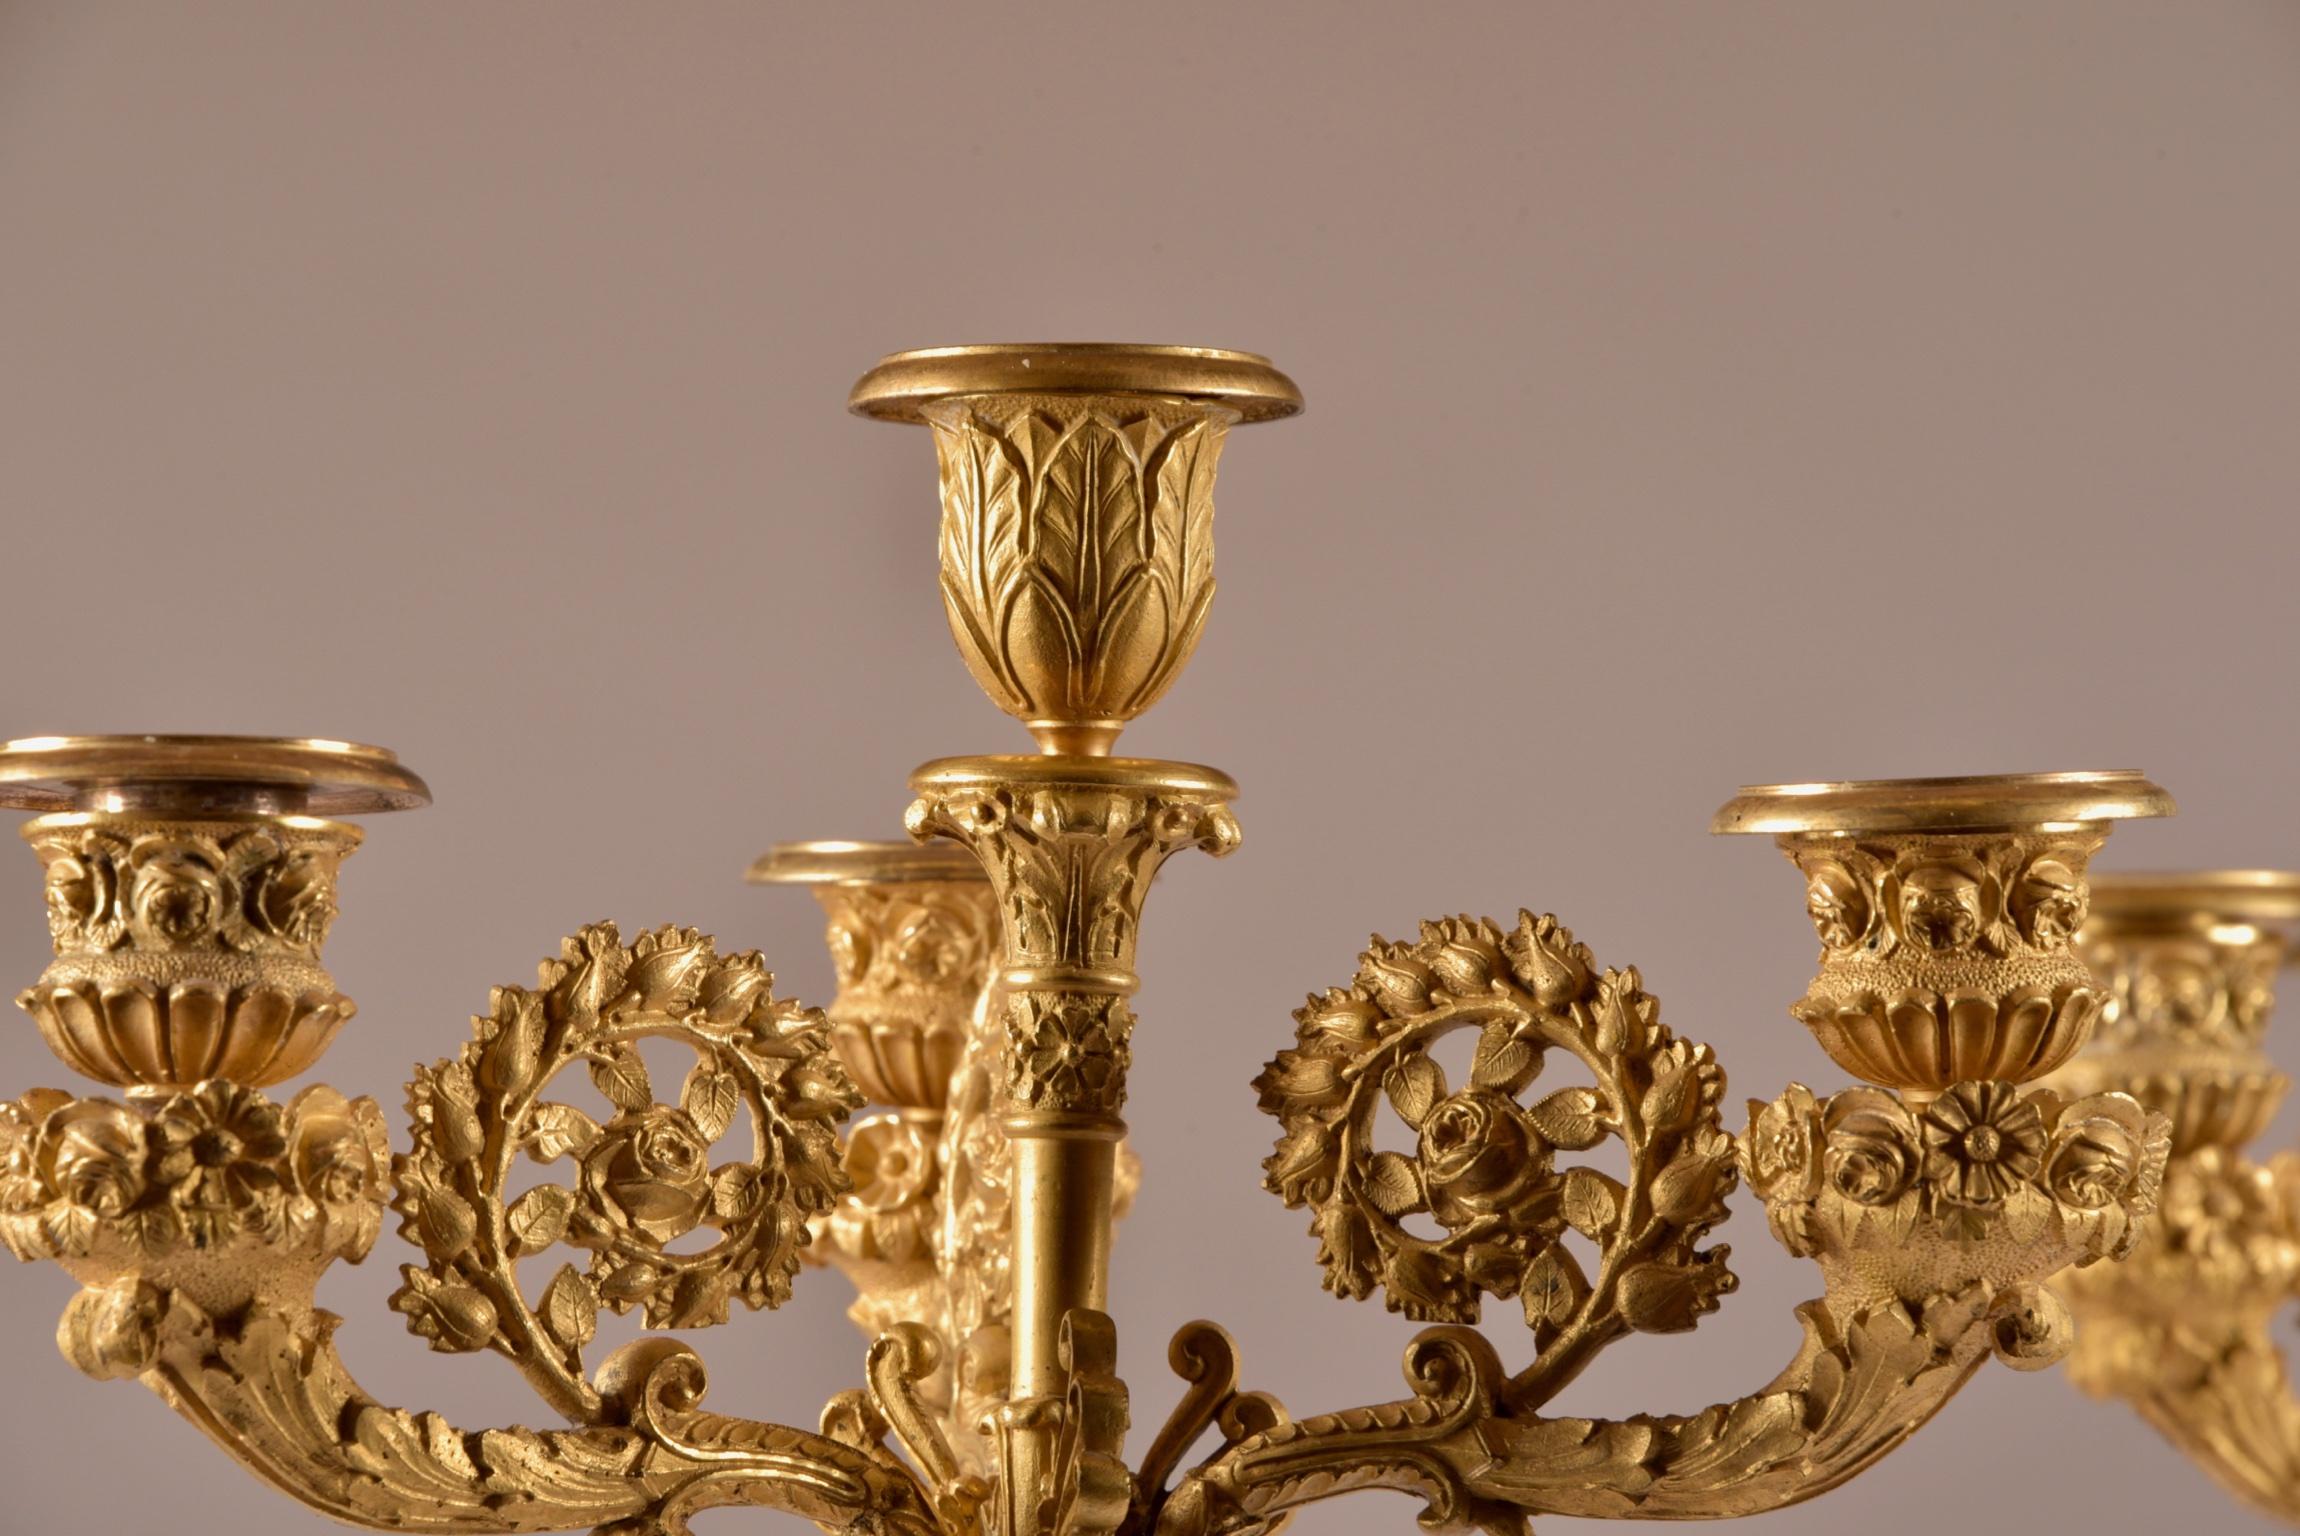 Pair of French Empire Candelabras with Putti, Superb Ormolu Candleholders, 1810  im Angebot 7